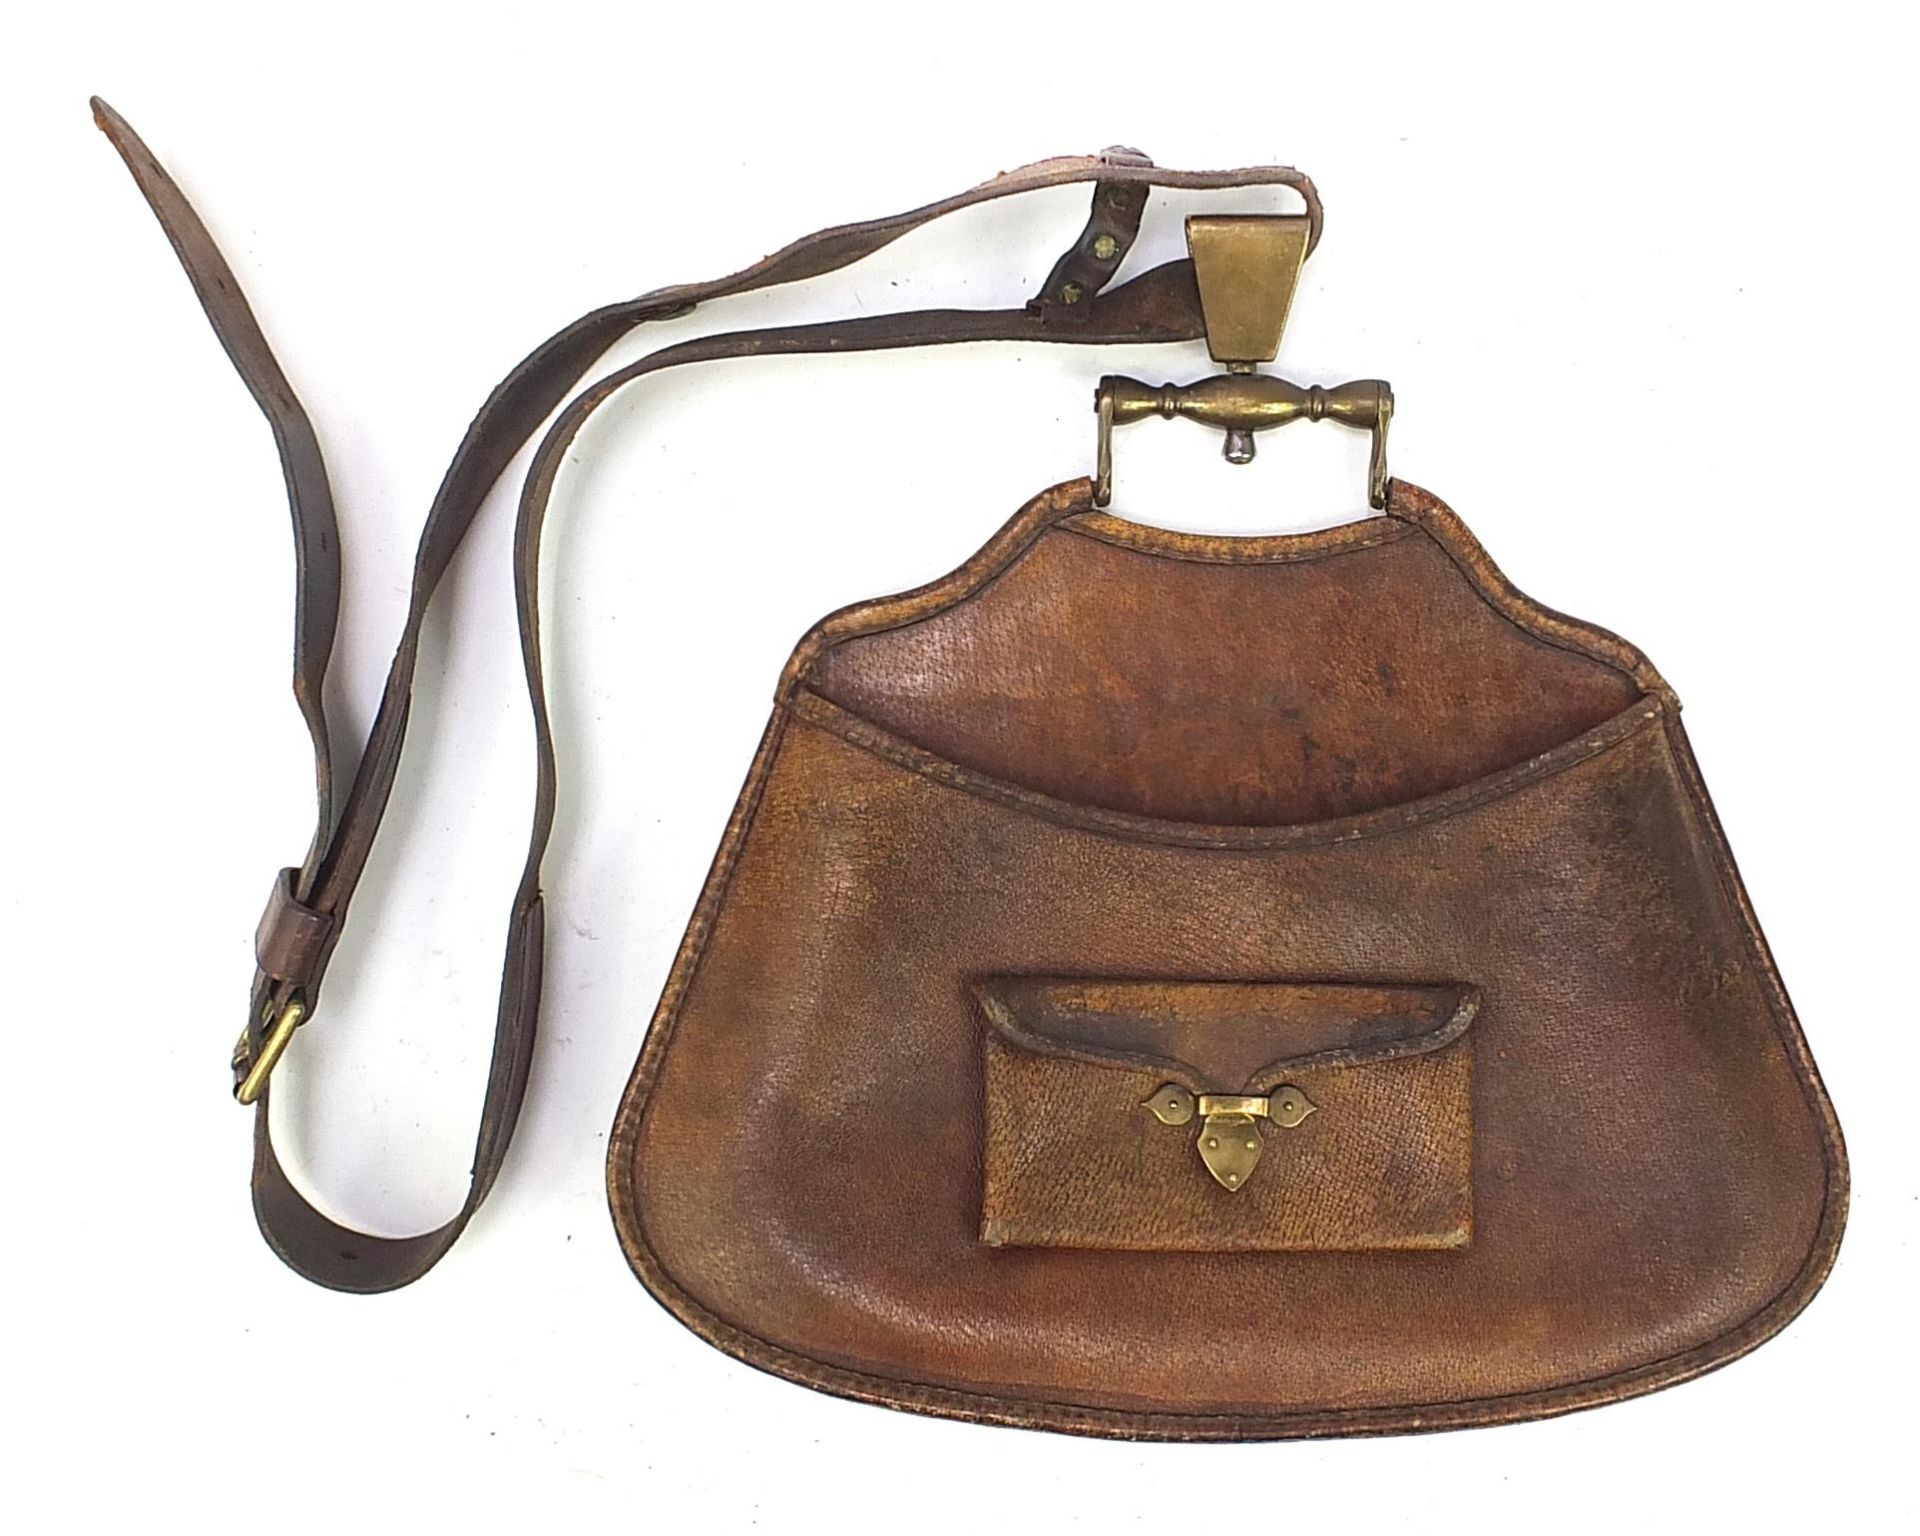 Vintage Hawker's brown leather bag with brass mounts and shoulder strap, the back 38cm wide - Image 2 of 2